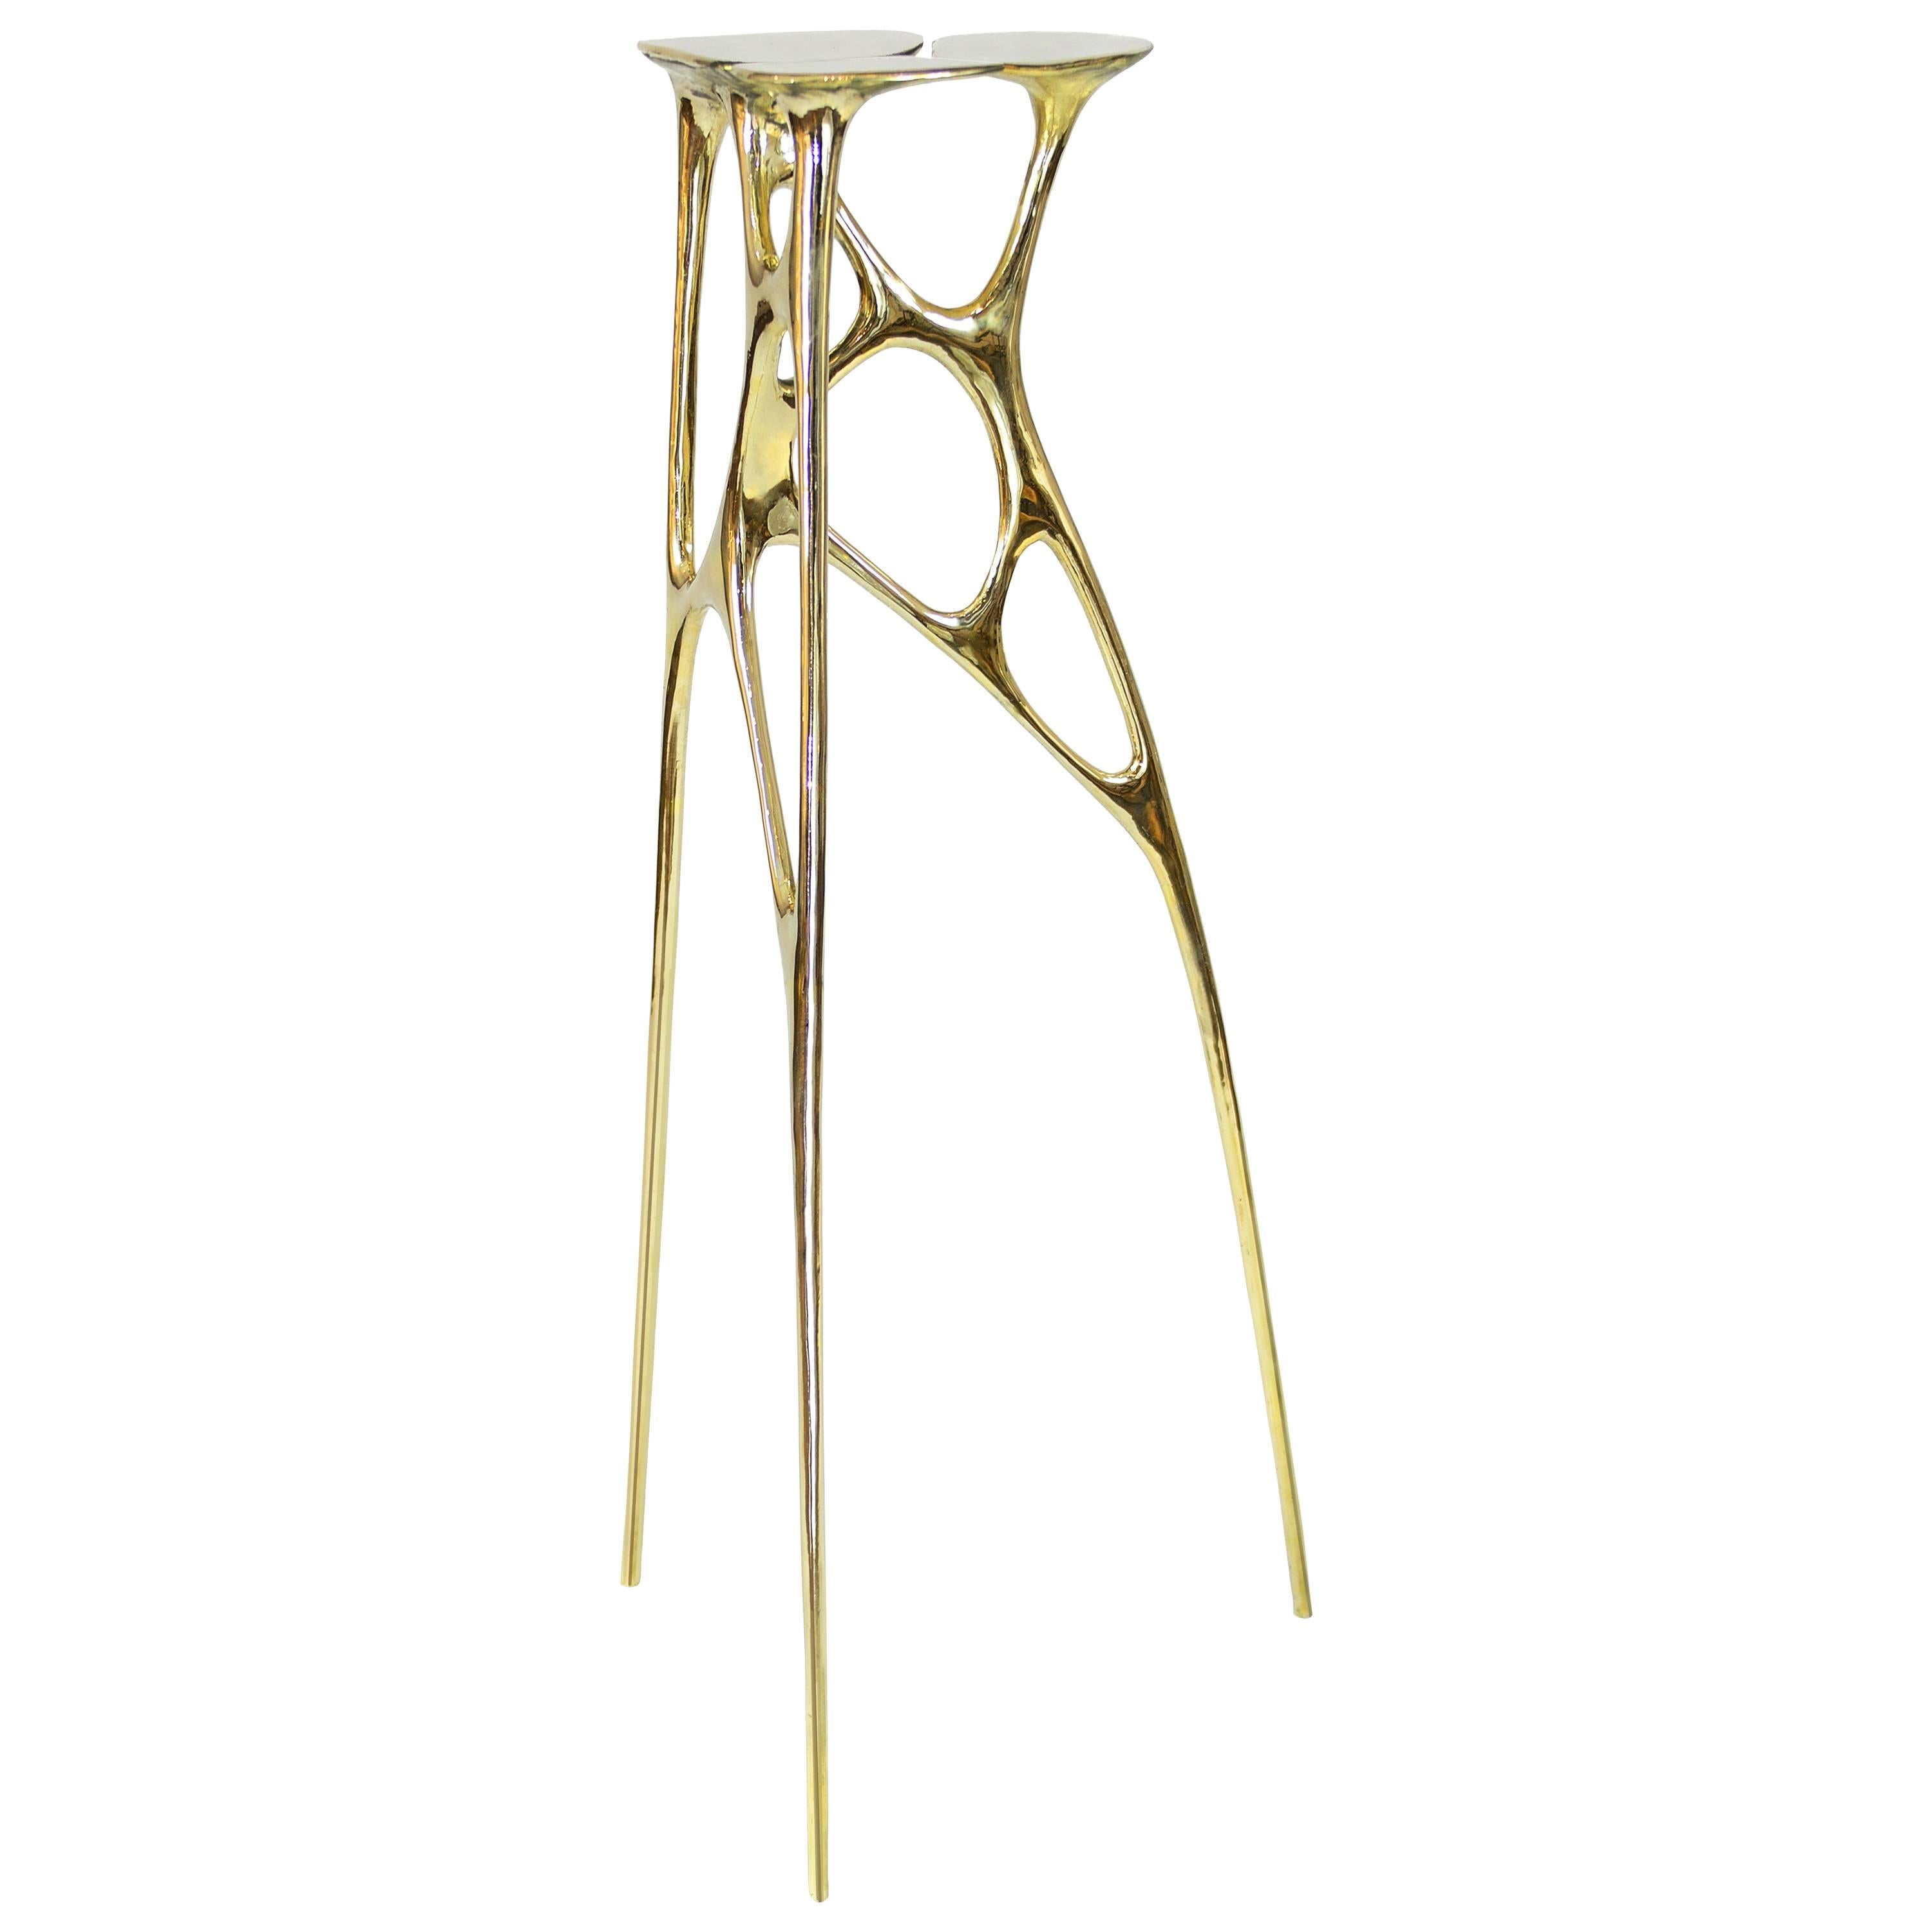 Polished Brass Lotus Pedestal/Planter Stand/Accent Table by Zhipeng Tan